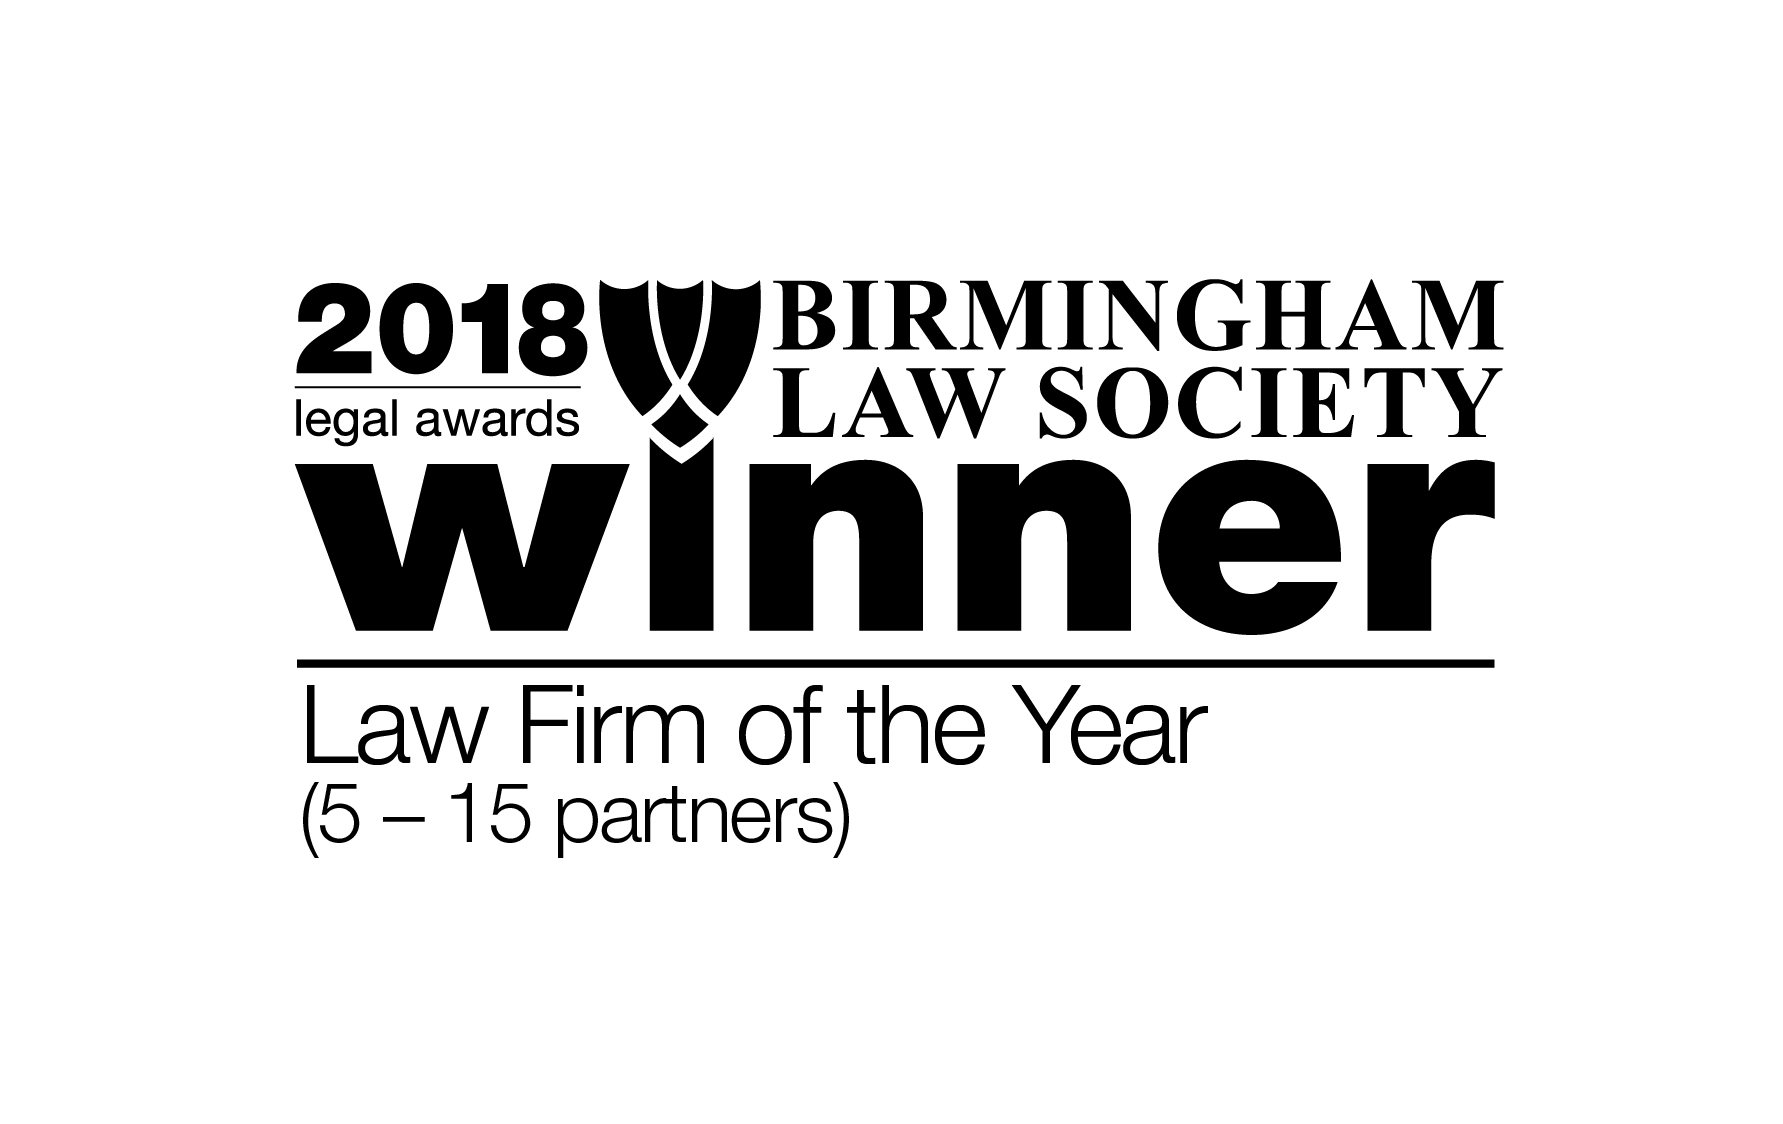 https://www.sydneymitchell.co.uk/sites/default/files/attachments/ls_winners_logos_2018_law_firm_of_the_year_5_-_15_partners_small.jpg#overlay-context=about-us/awards-accreditations